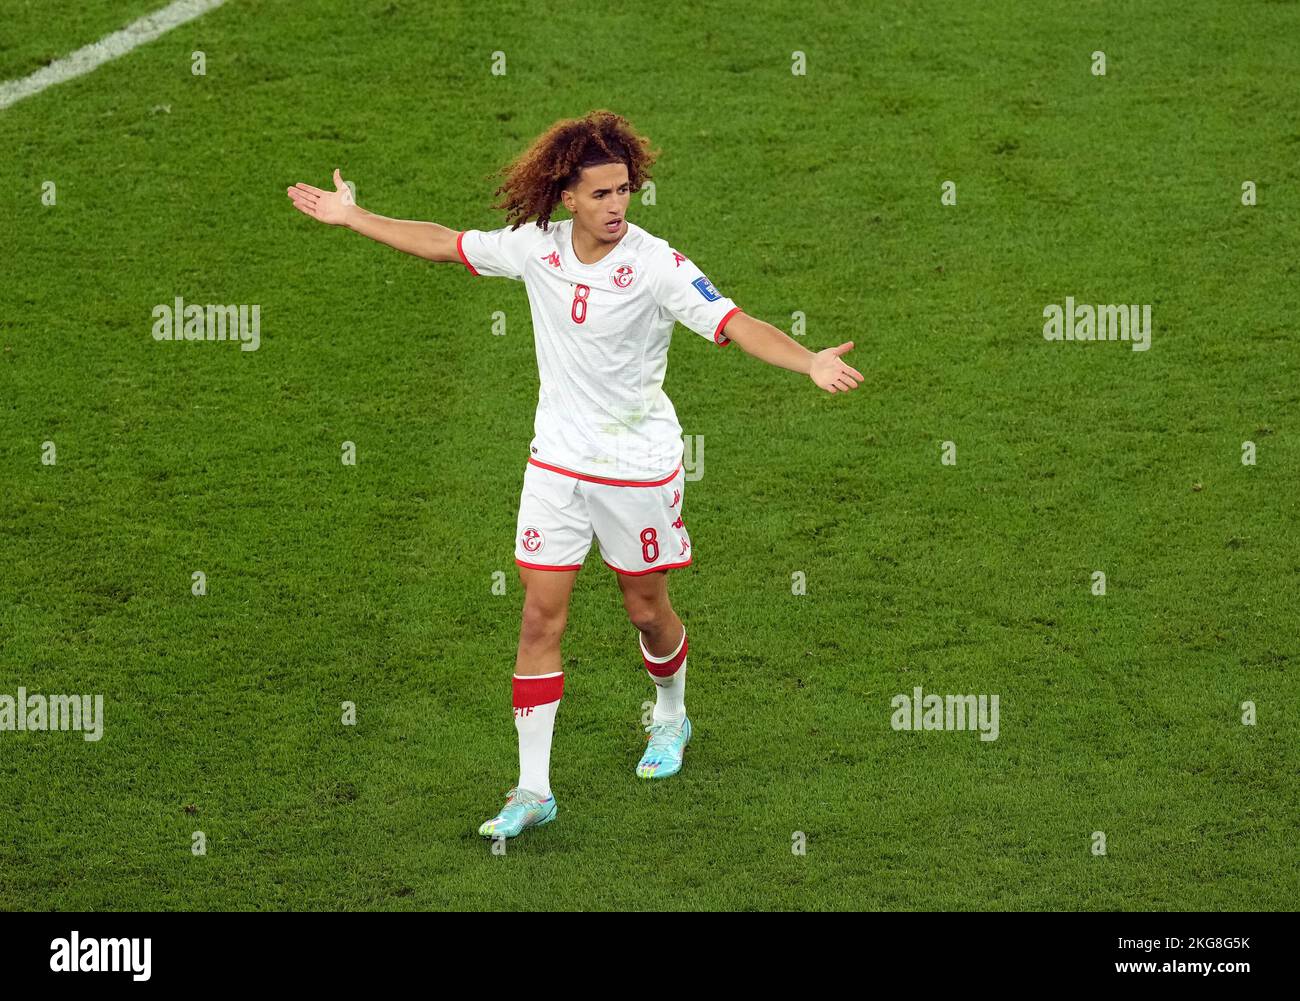 Tunisia's Hannibal Mejbri during the FIFA World Cup Group D match at Education City Stadium, Al Rayyan. Picture date: Tuesday November 22, 2022. Stock Photo